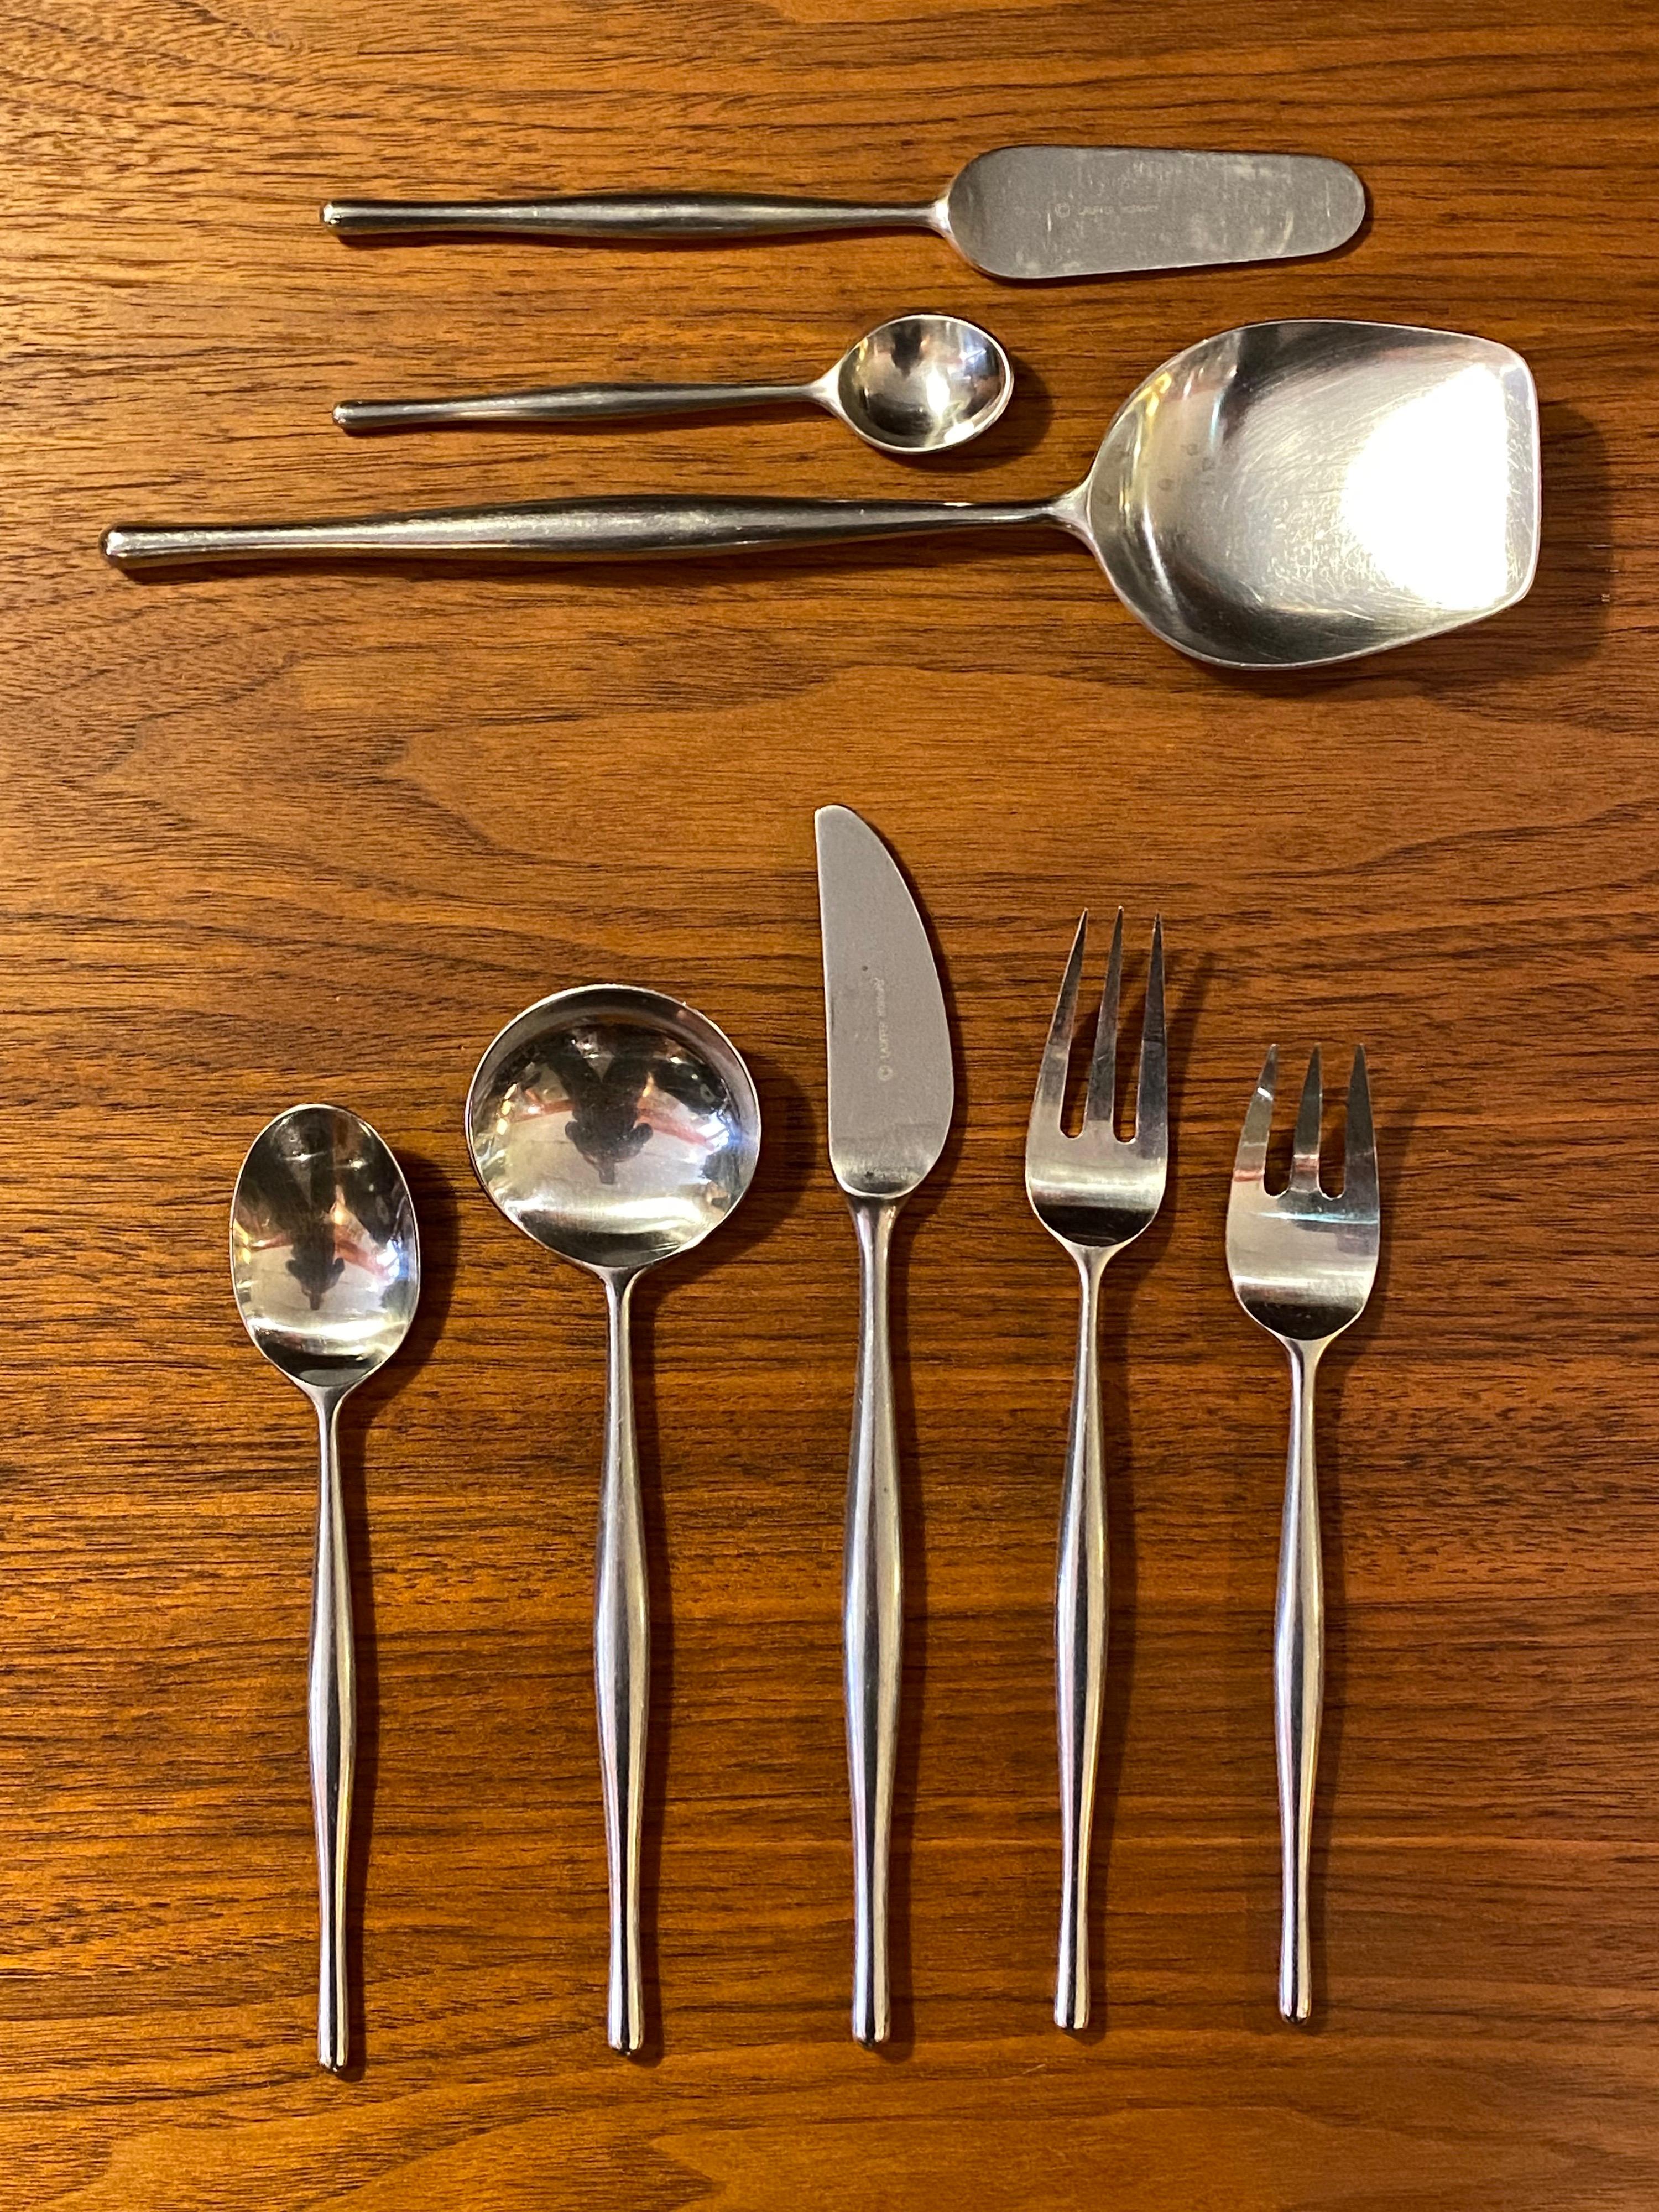 Don Wallance for Lauffer Design 3 Stainless Steel Flatware Set. Service for 8 plus 2 Serving Pieces. Harder to find Set, beautiful curved flaring Handle Design, fatter in the middle and then sleeker end. Stainless Steel Construction so Dishwasher